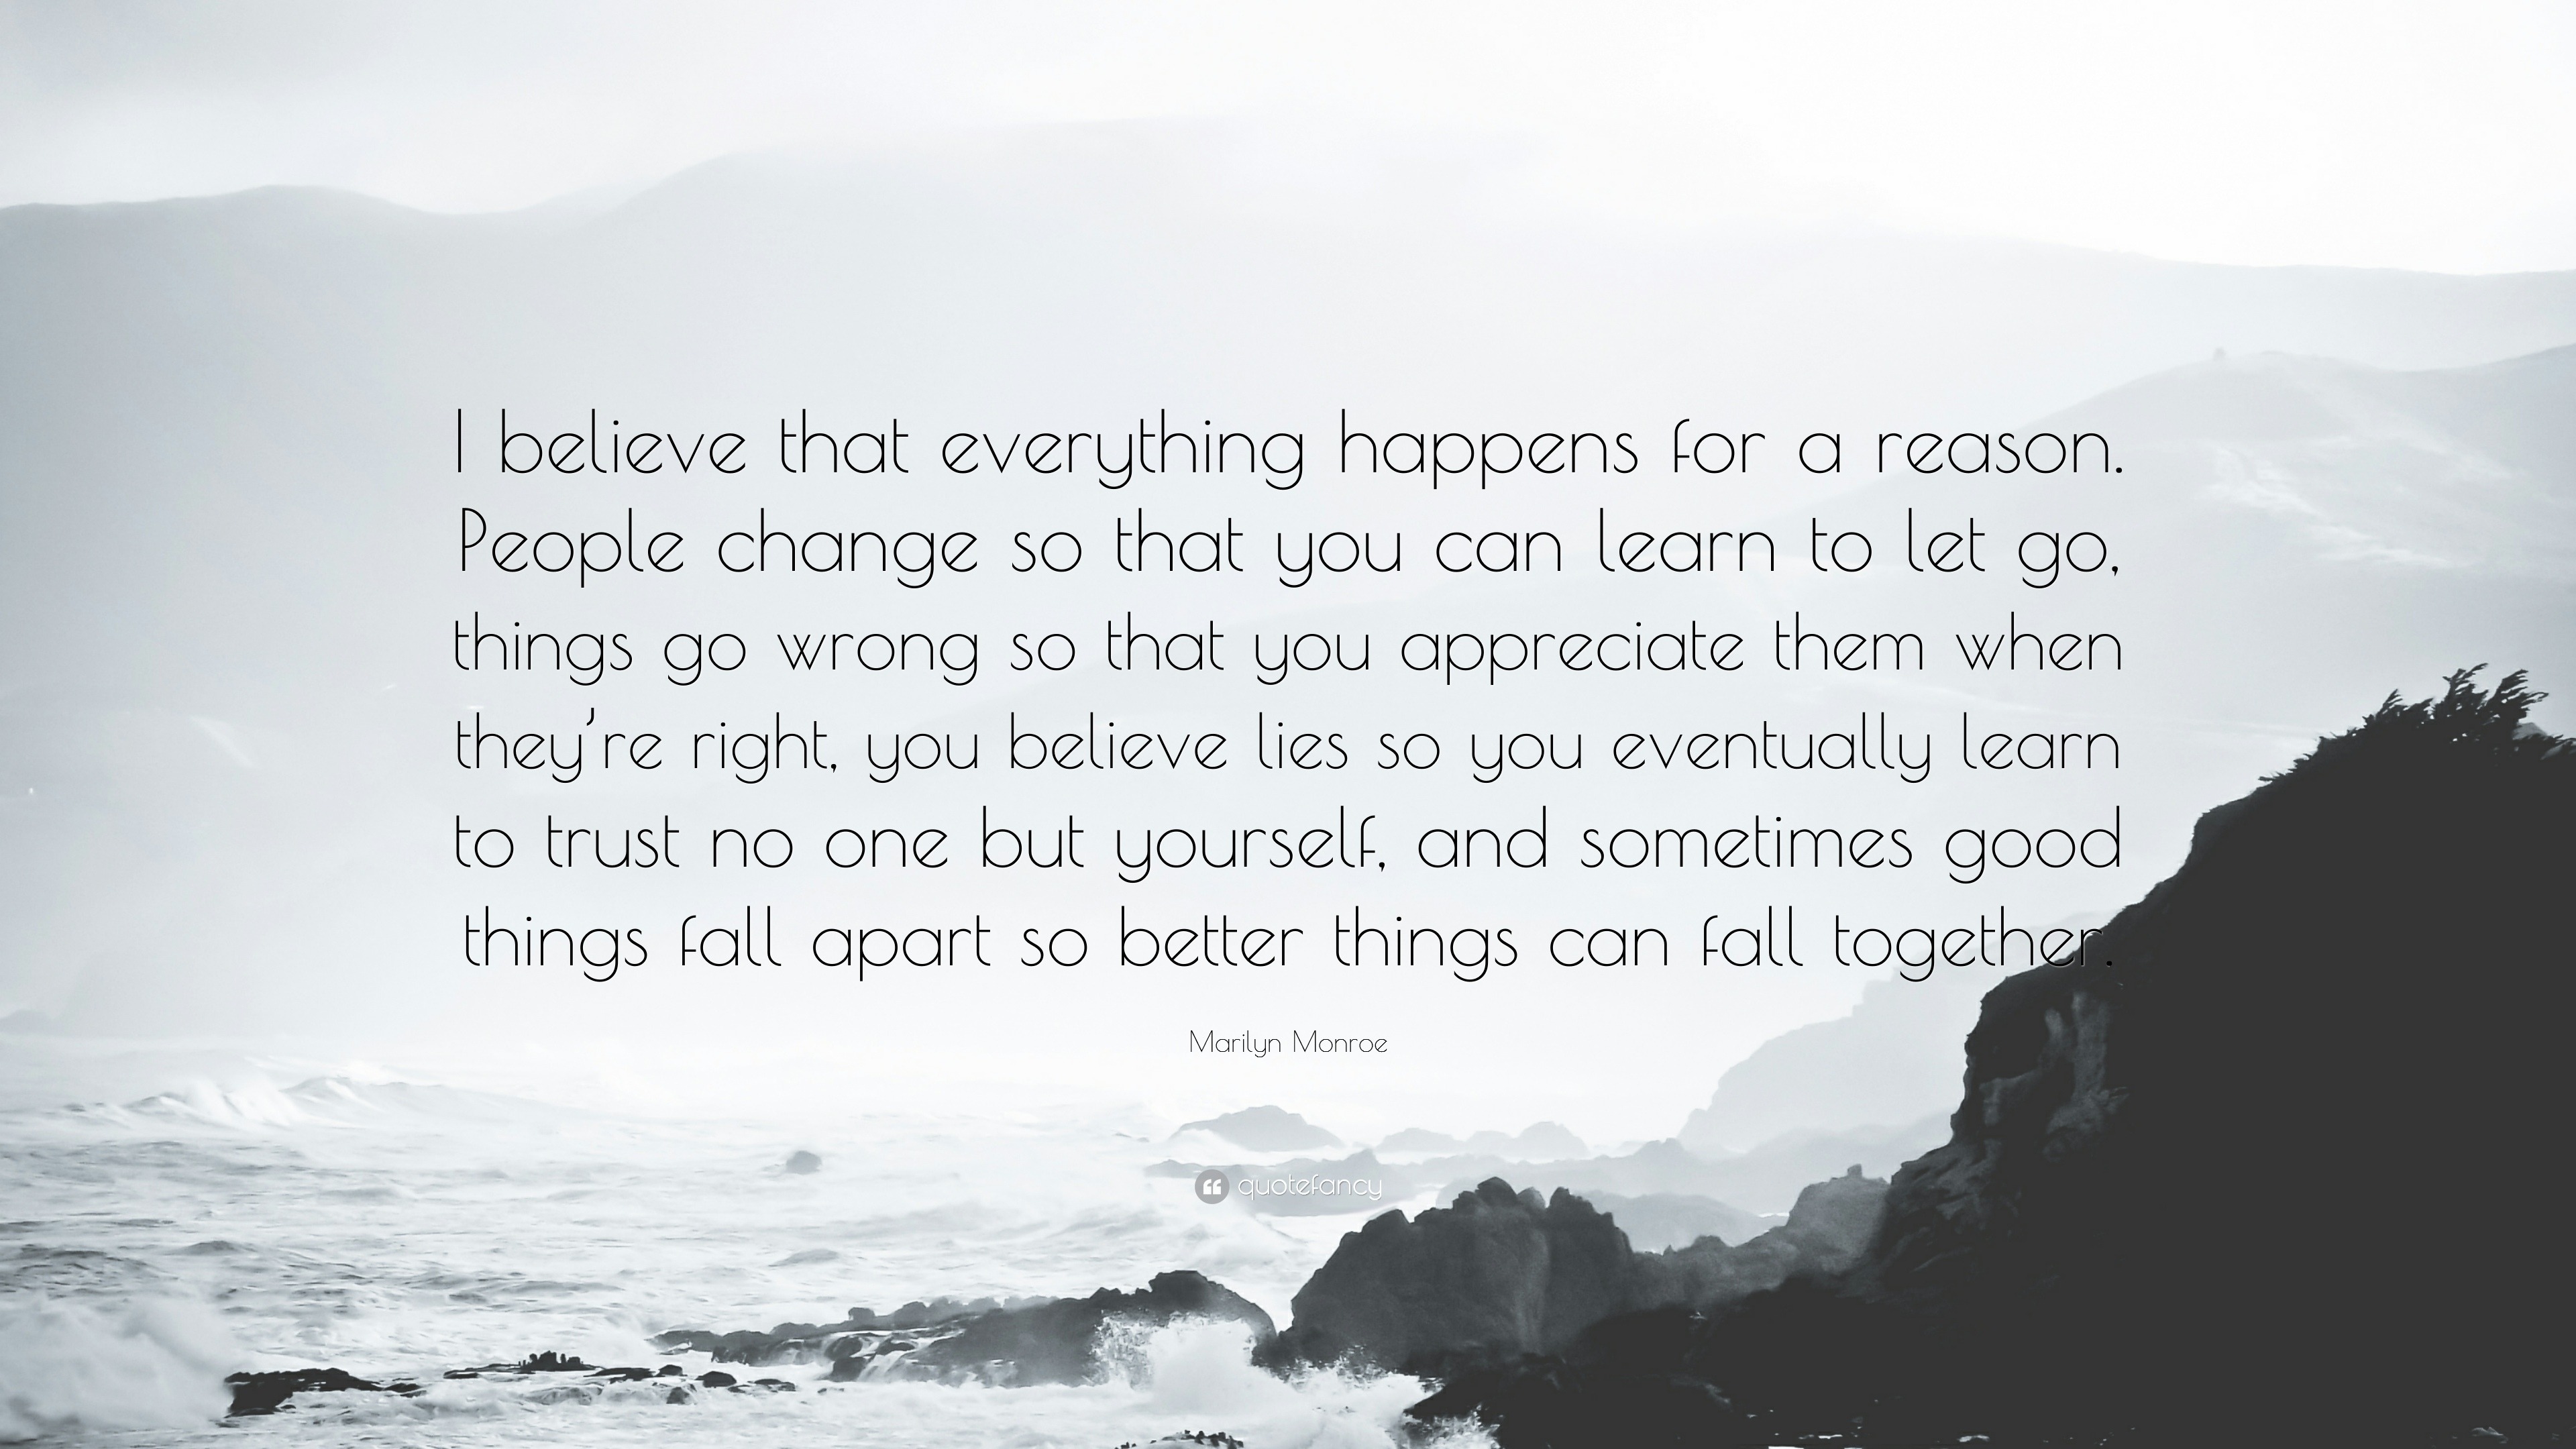 Marilyn Monroe Quote “I believe that everything happens